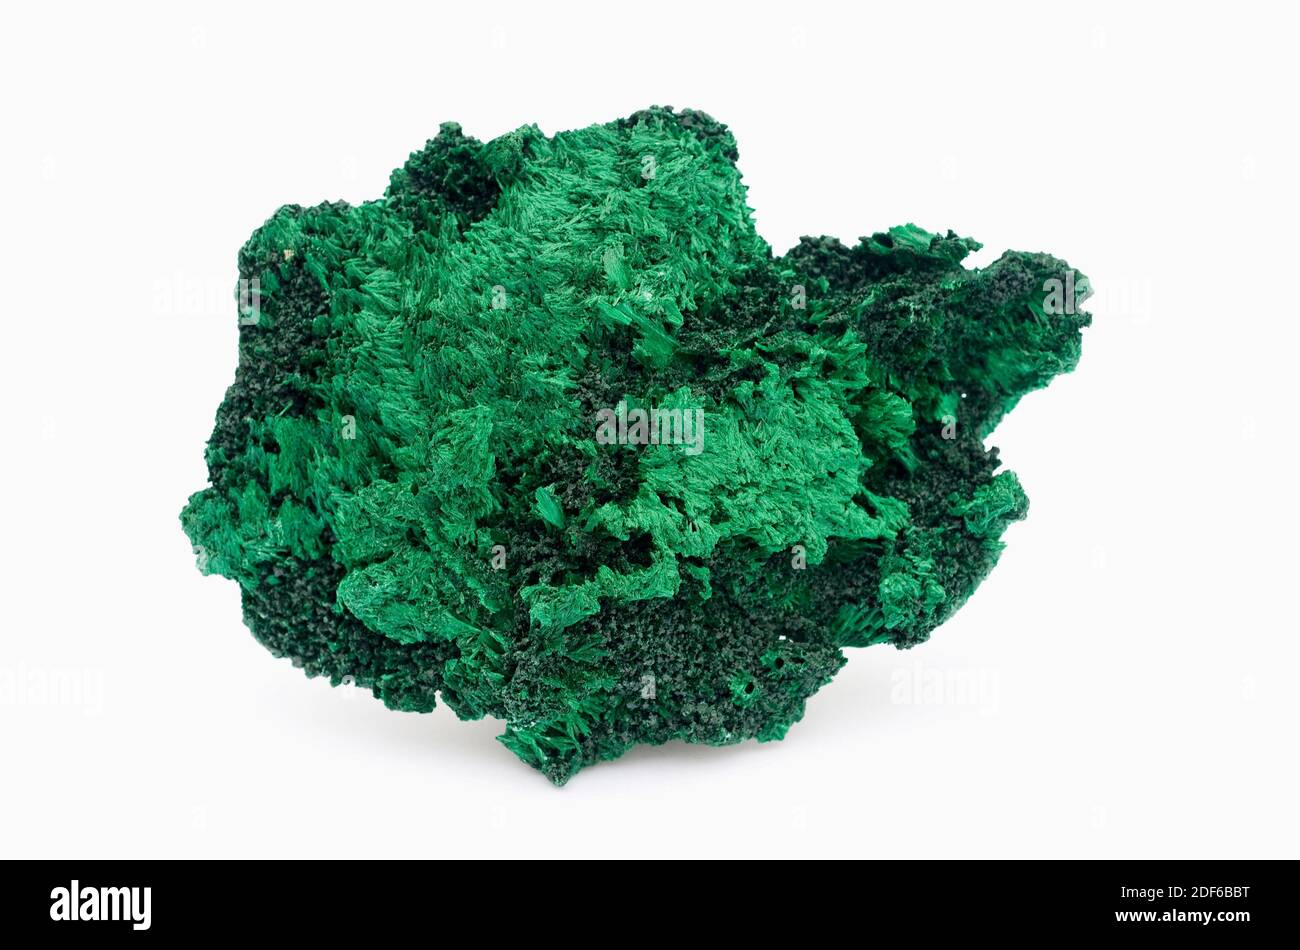 Malachite is a copper carbonate hydroxide mineral. This sample comes from Katanga, Democratic Republic of the Congo (Zaire). Stock Photo